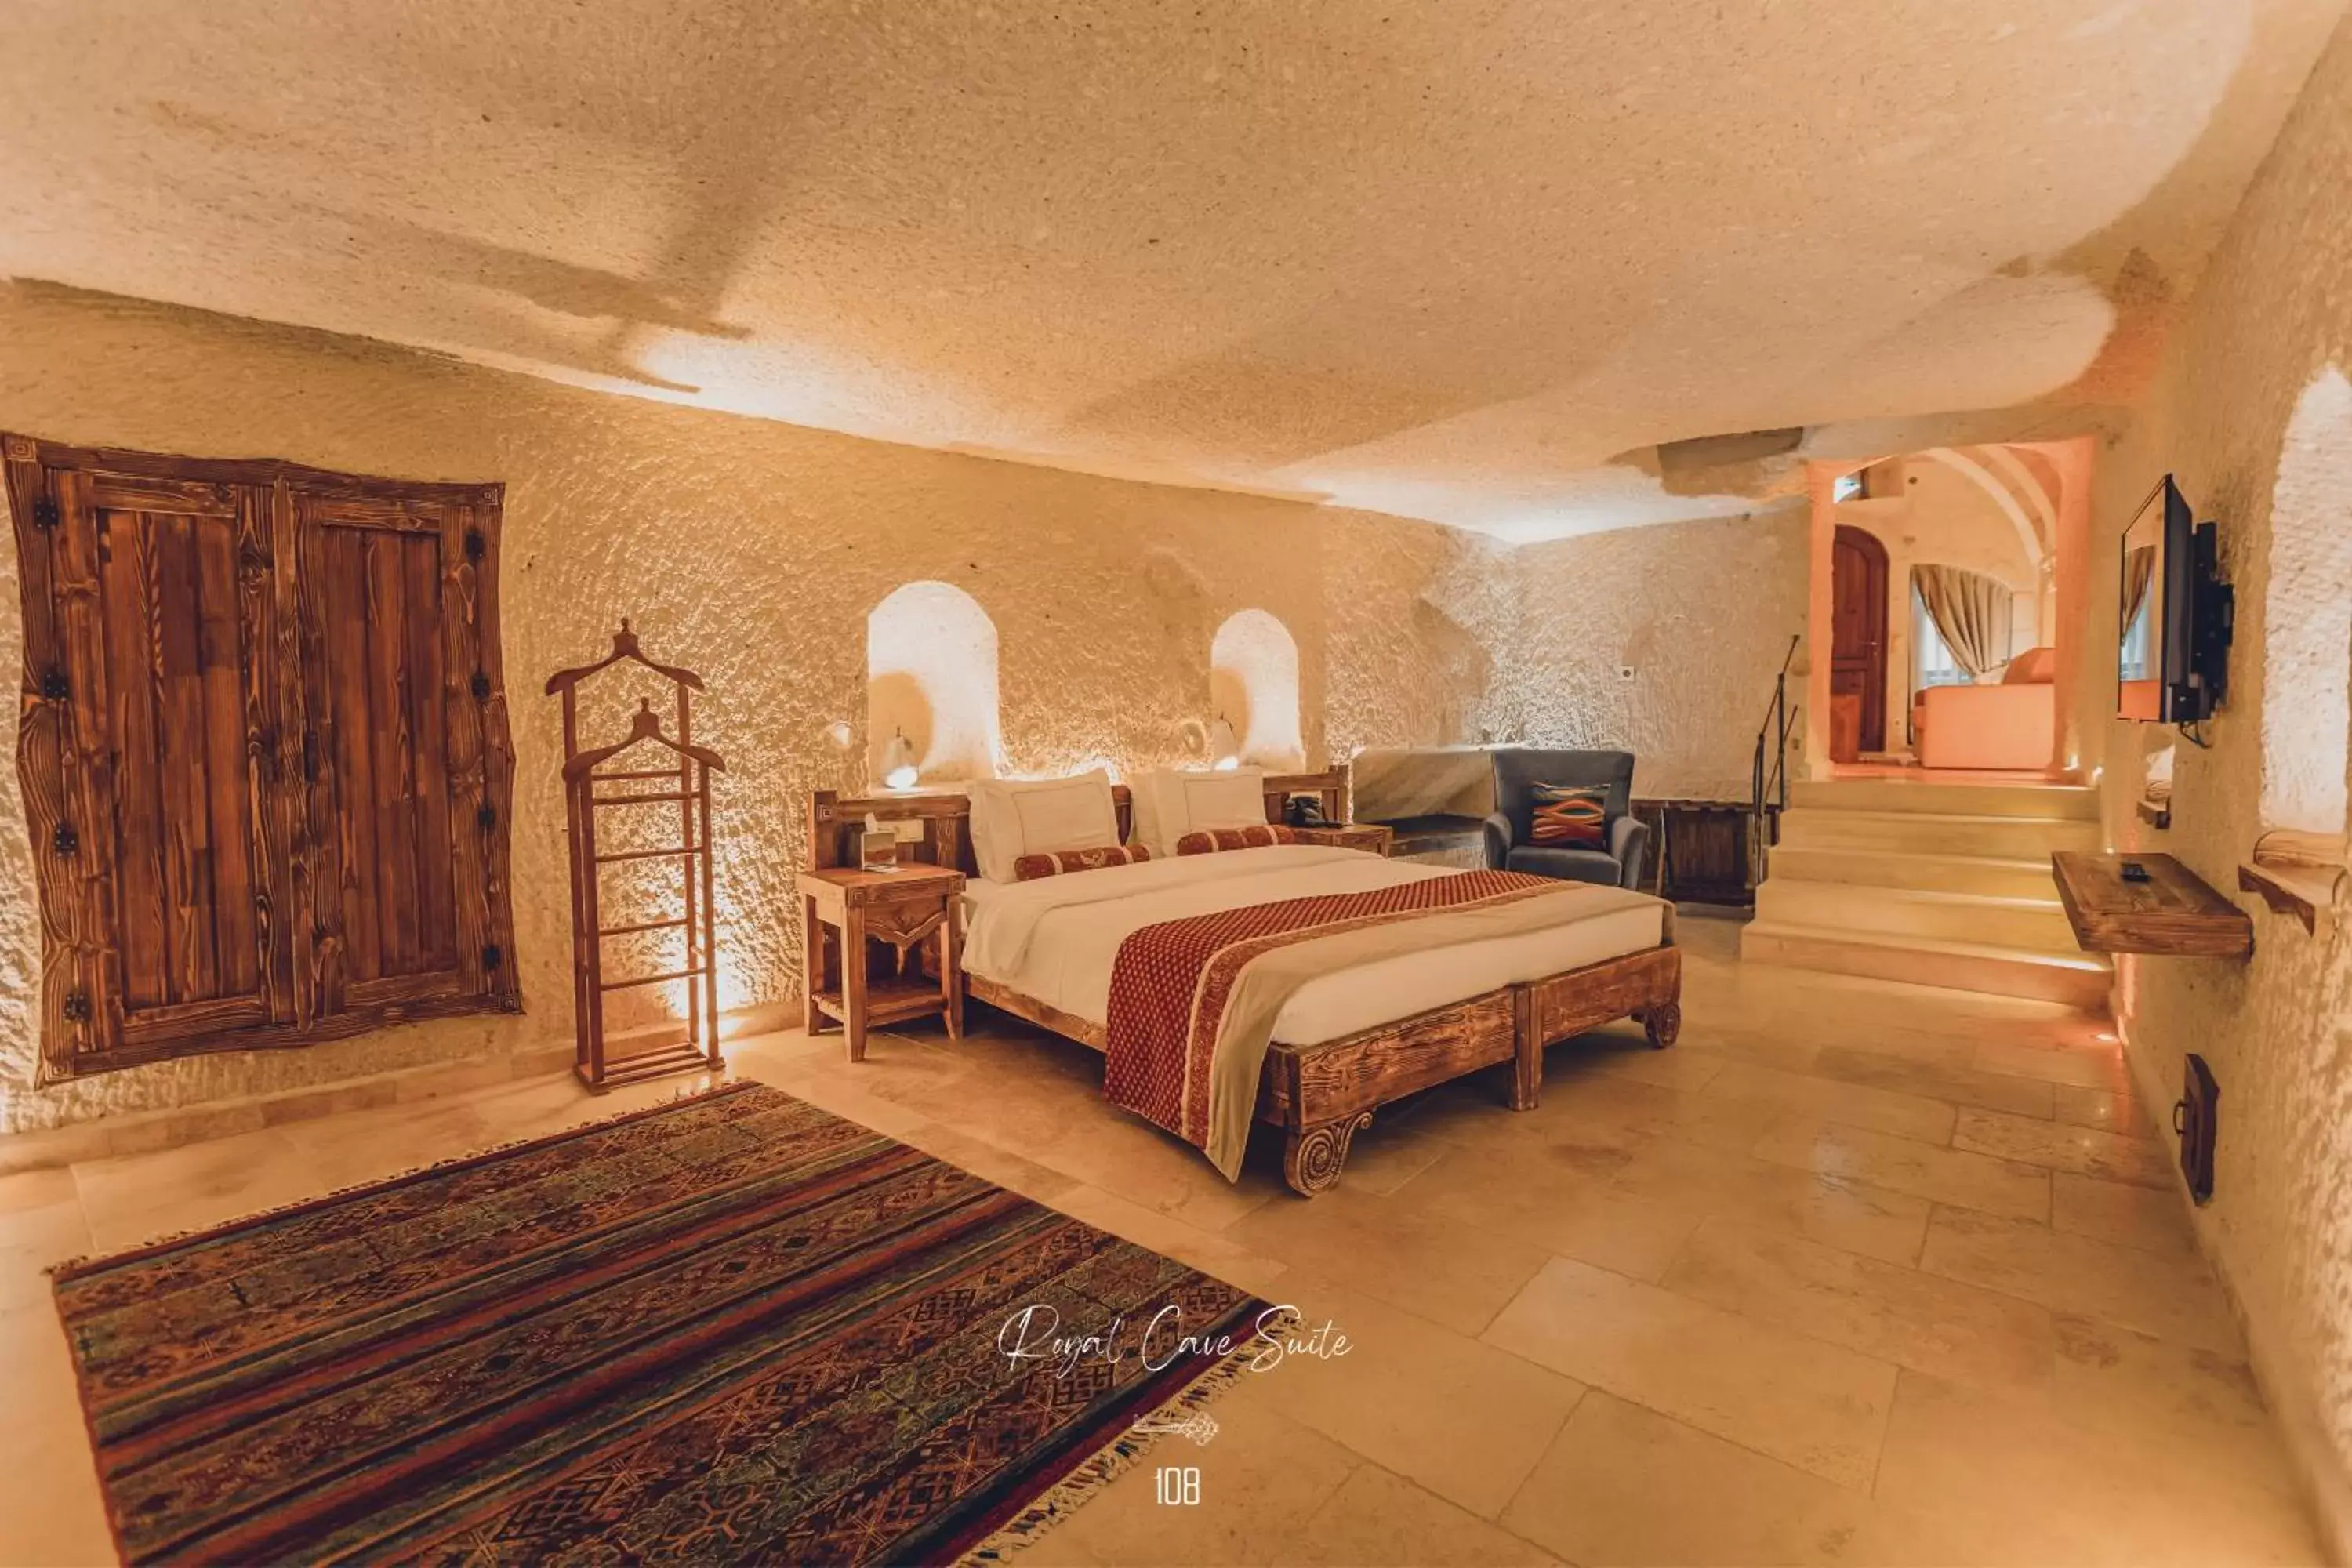 Photo of the whole room in Nino Cave Suites